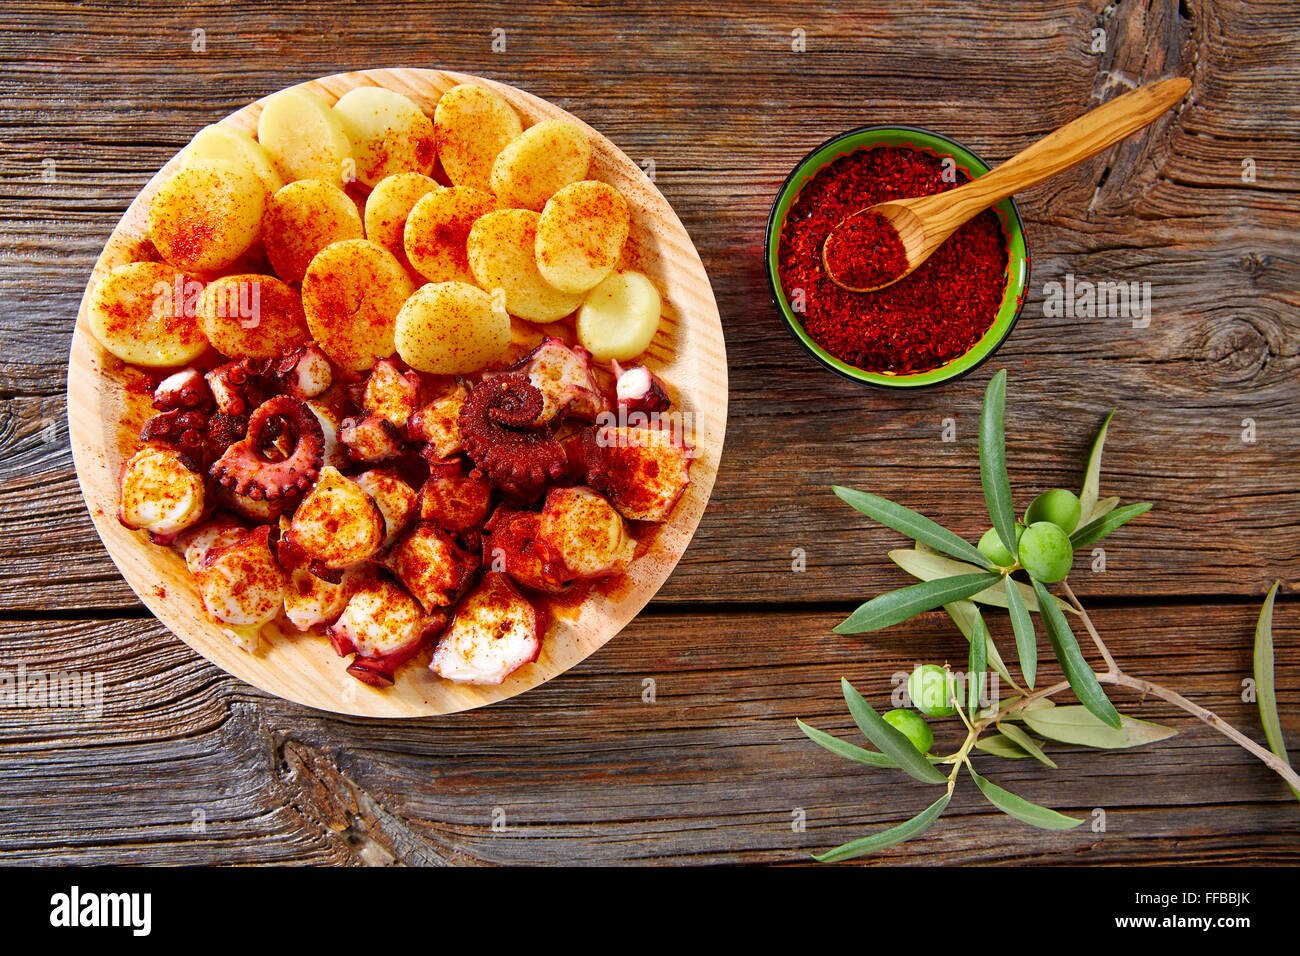 Tapas Pulpo a Feira with octopus potatoes gallega style and paprika recipe from Spain Stock Photo